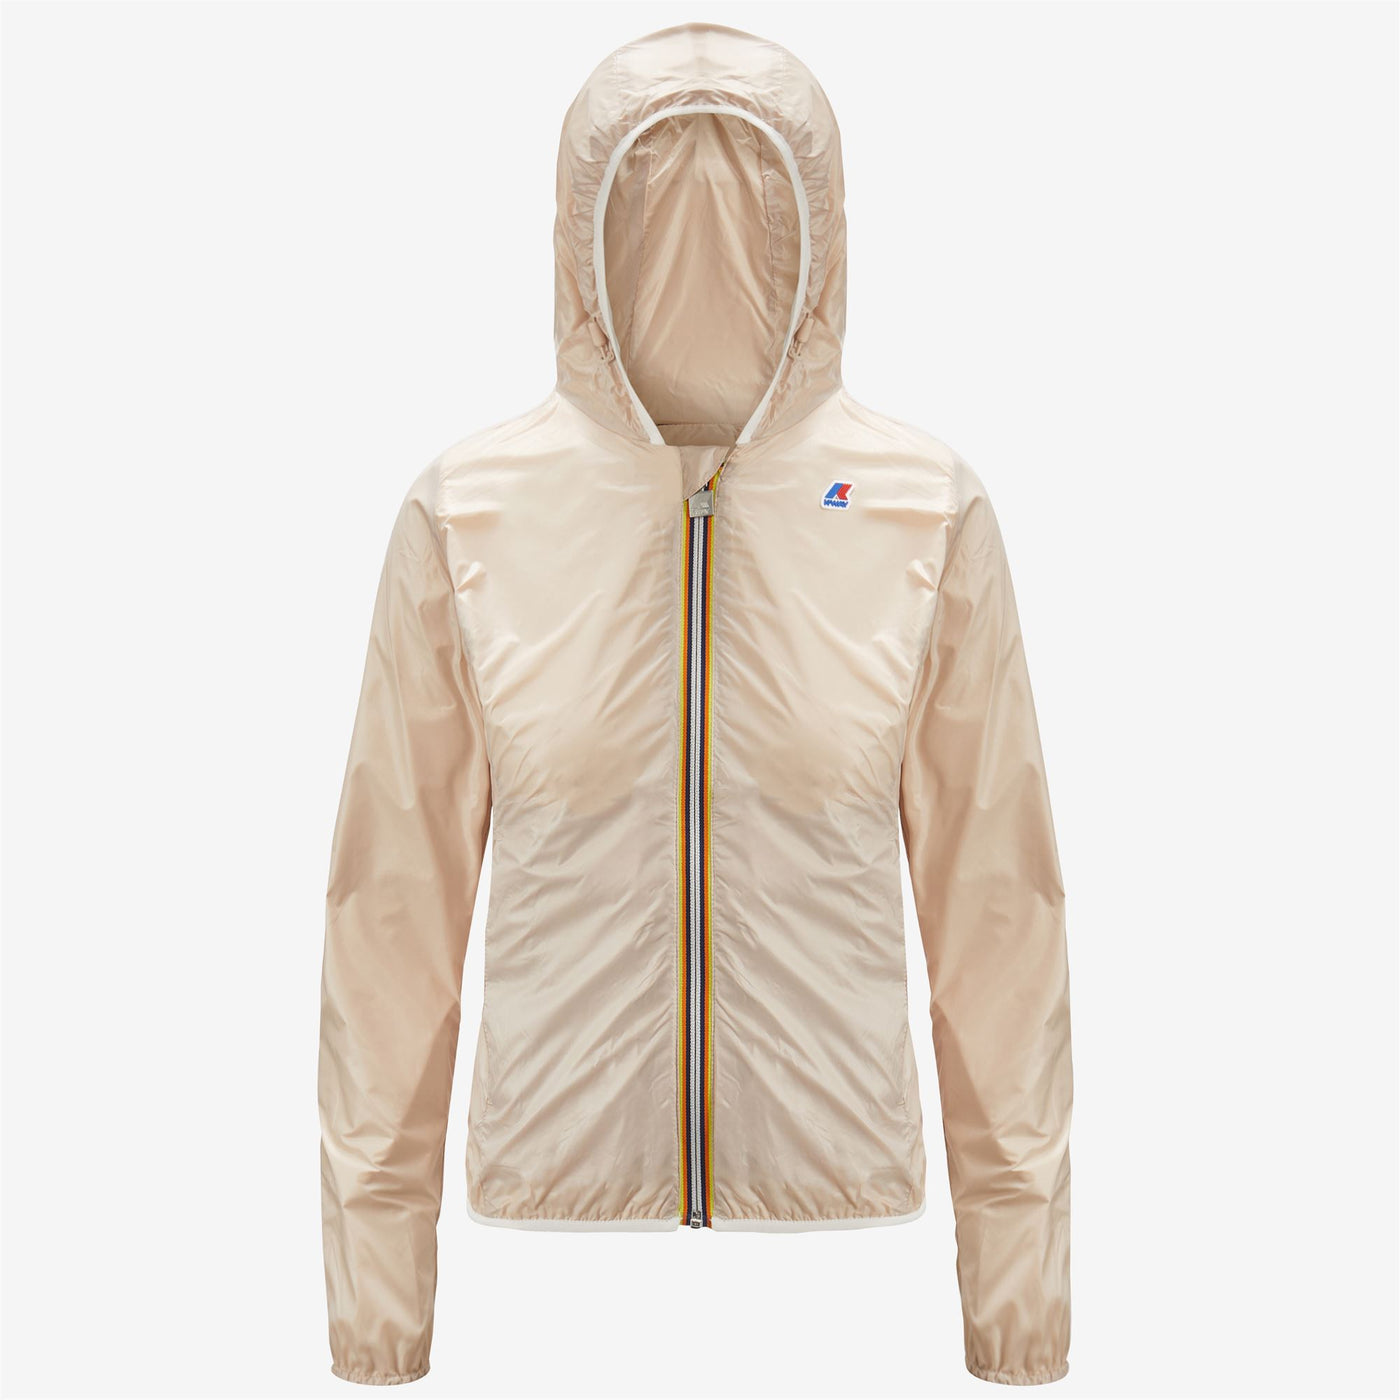 Jackets Woman LILY PLUS.2 DOUBLE Short WHITE - BEIGE | kway Photo (jpg Rgb)			